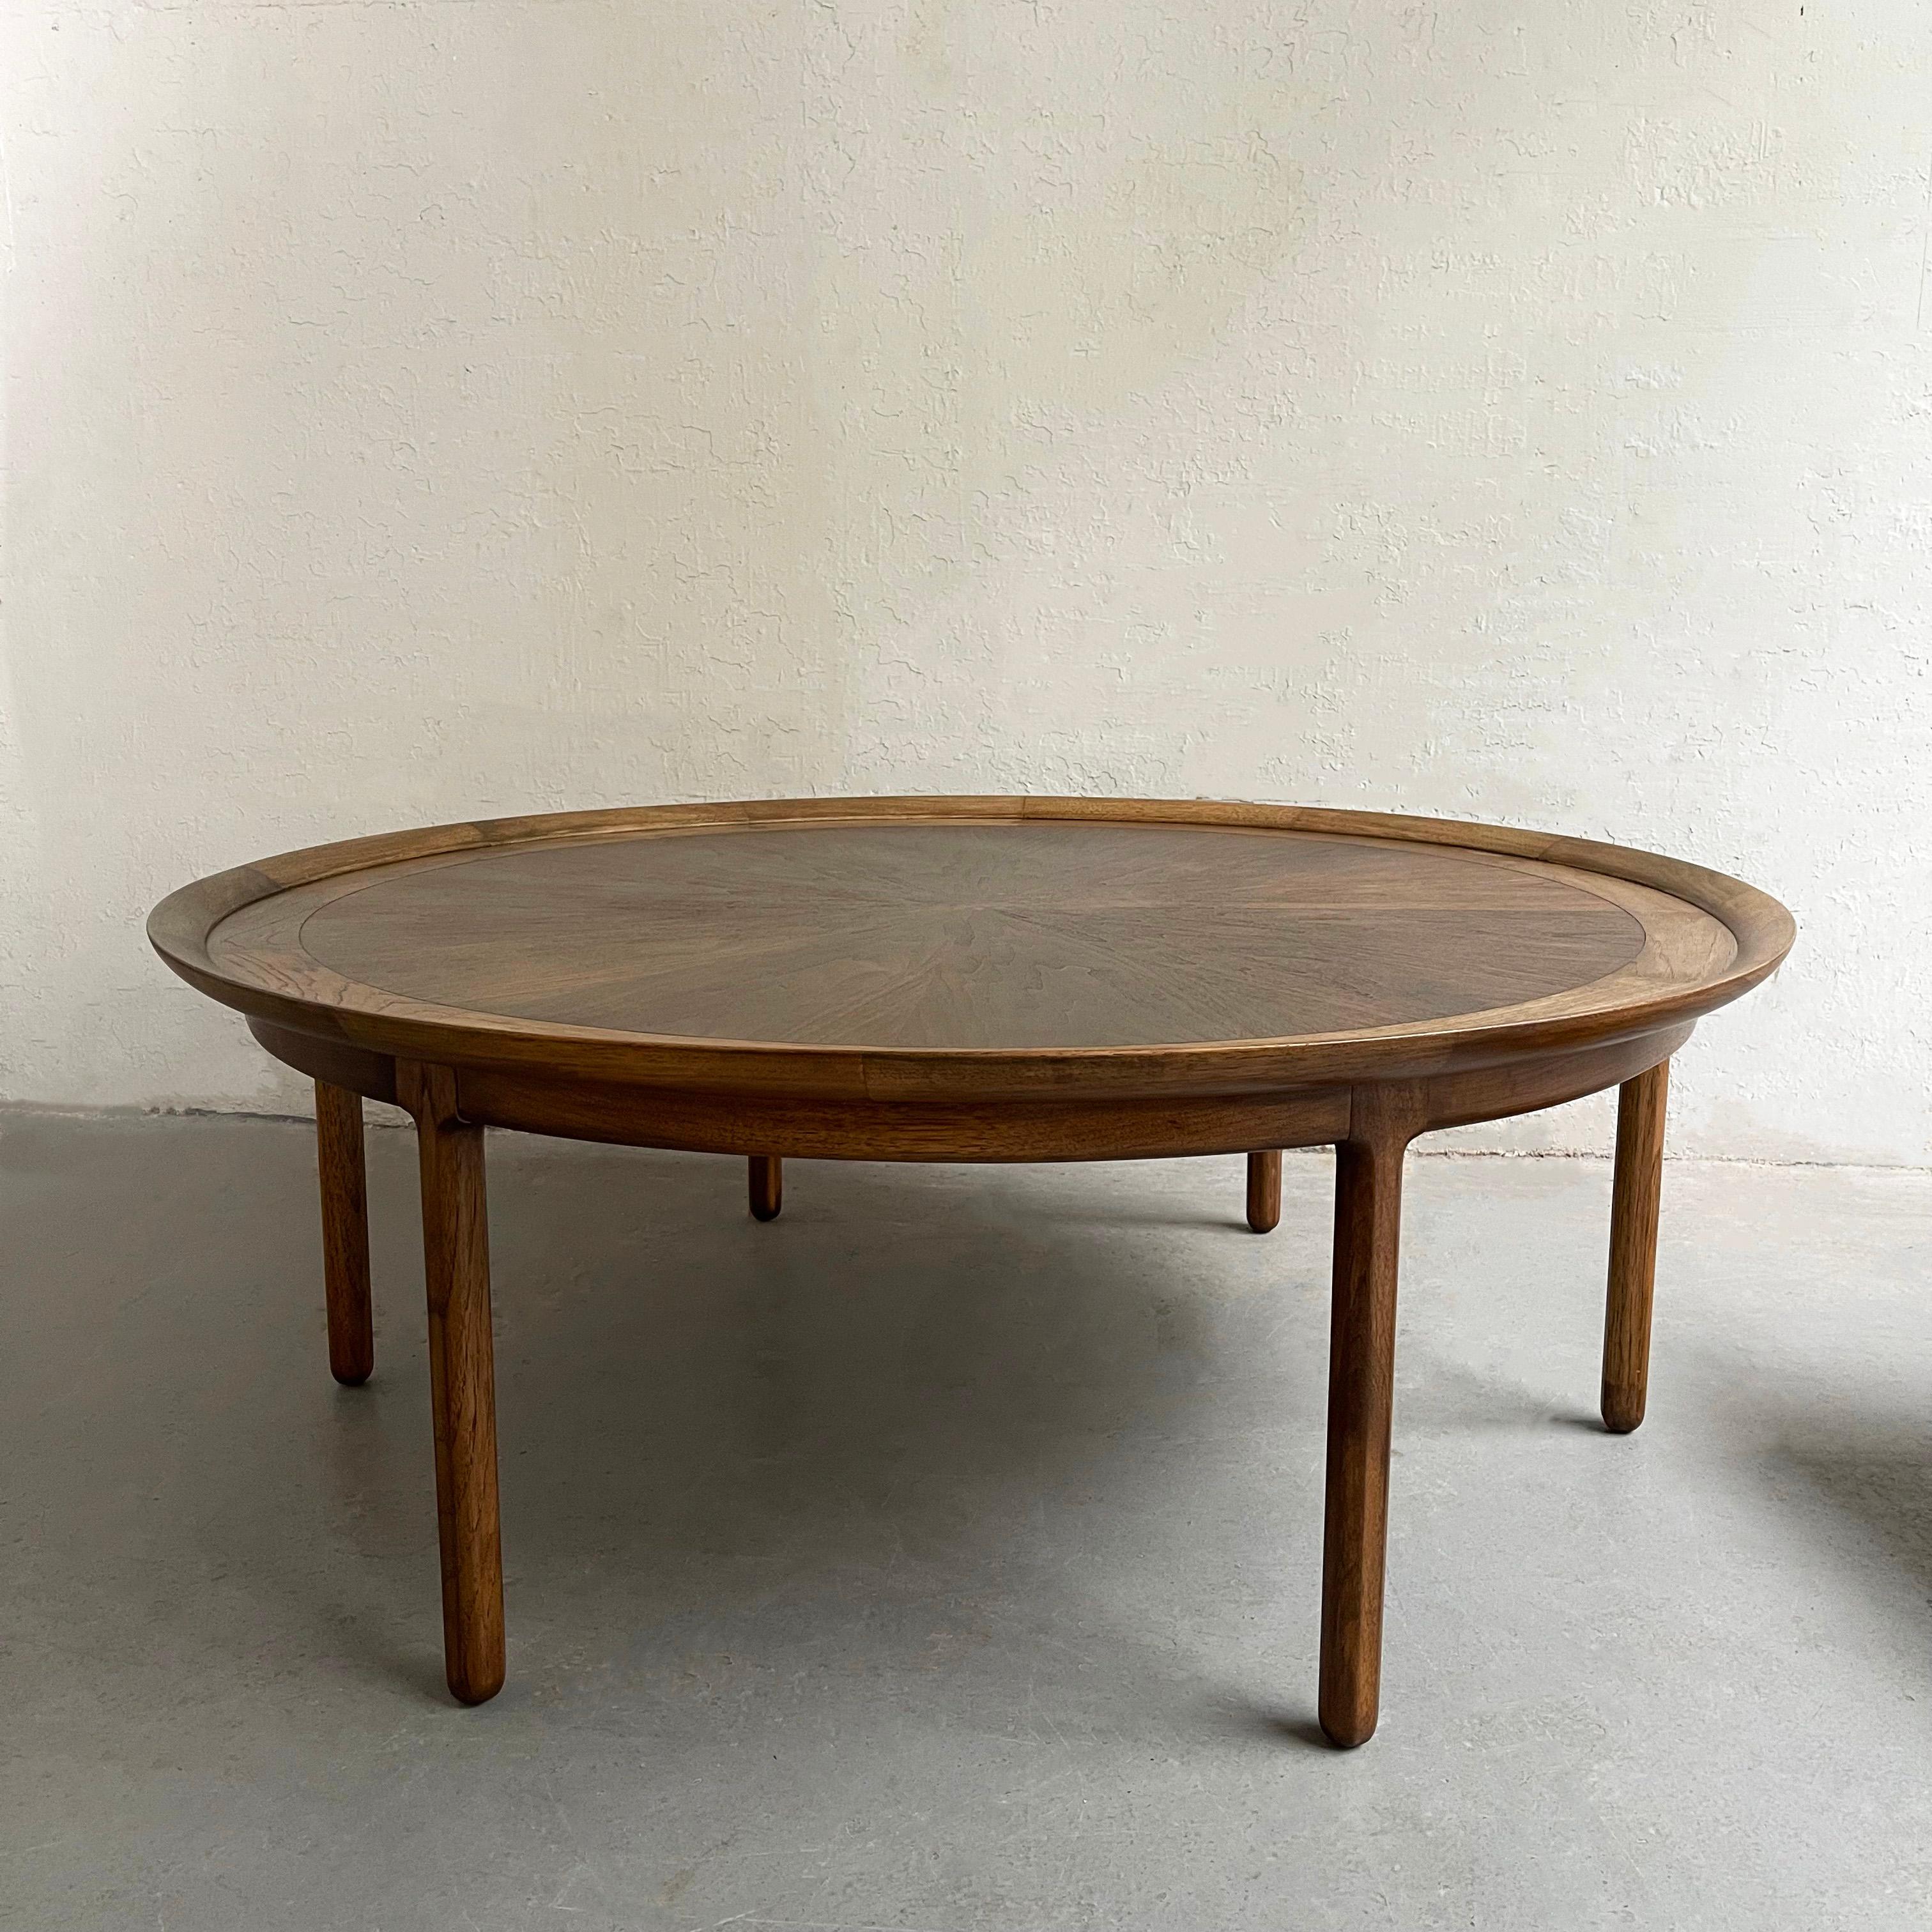 Impressively large, Mid-Century Modern, 54 inch round, coffee table by Tomlinson Furniture, Sophisticate Line features a recessed, bookmatched pecan wood top with butterfly joinery. The lip comes to 20.5 inches height.